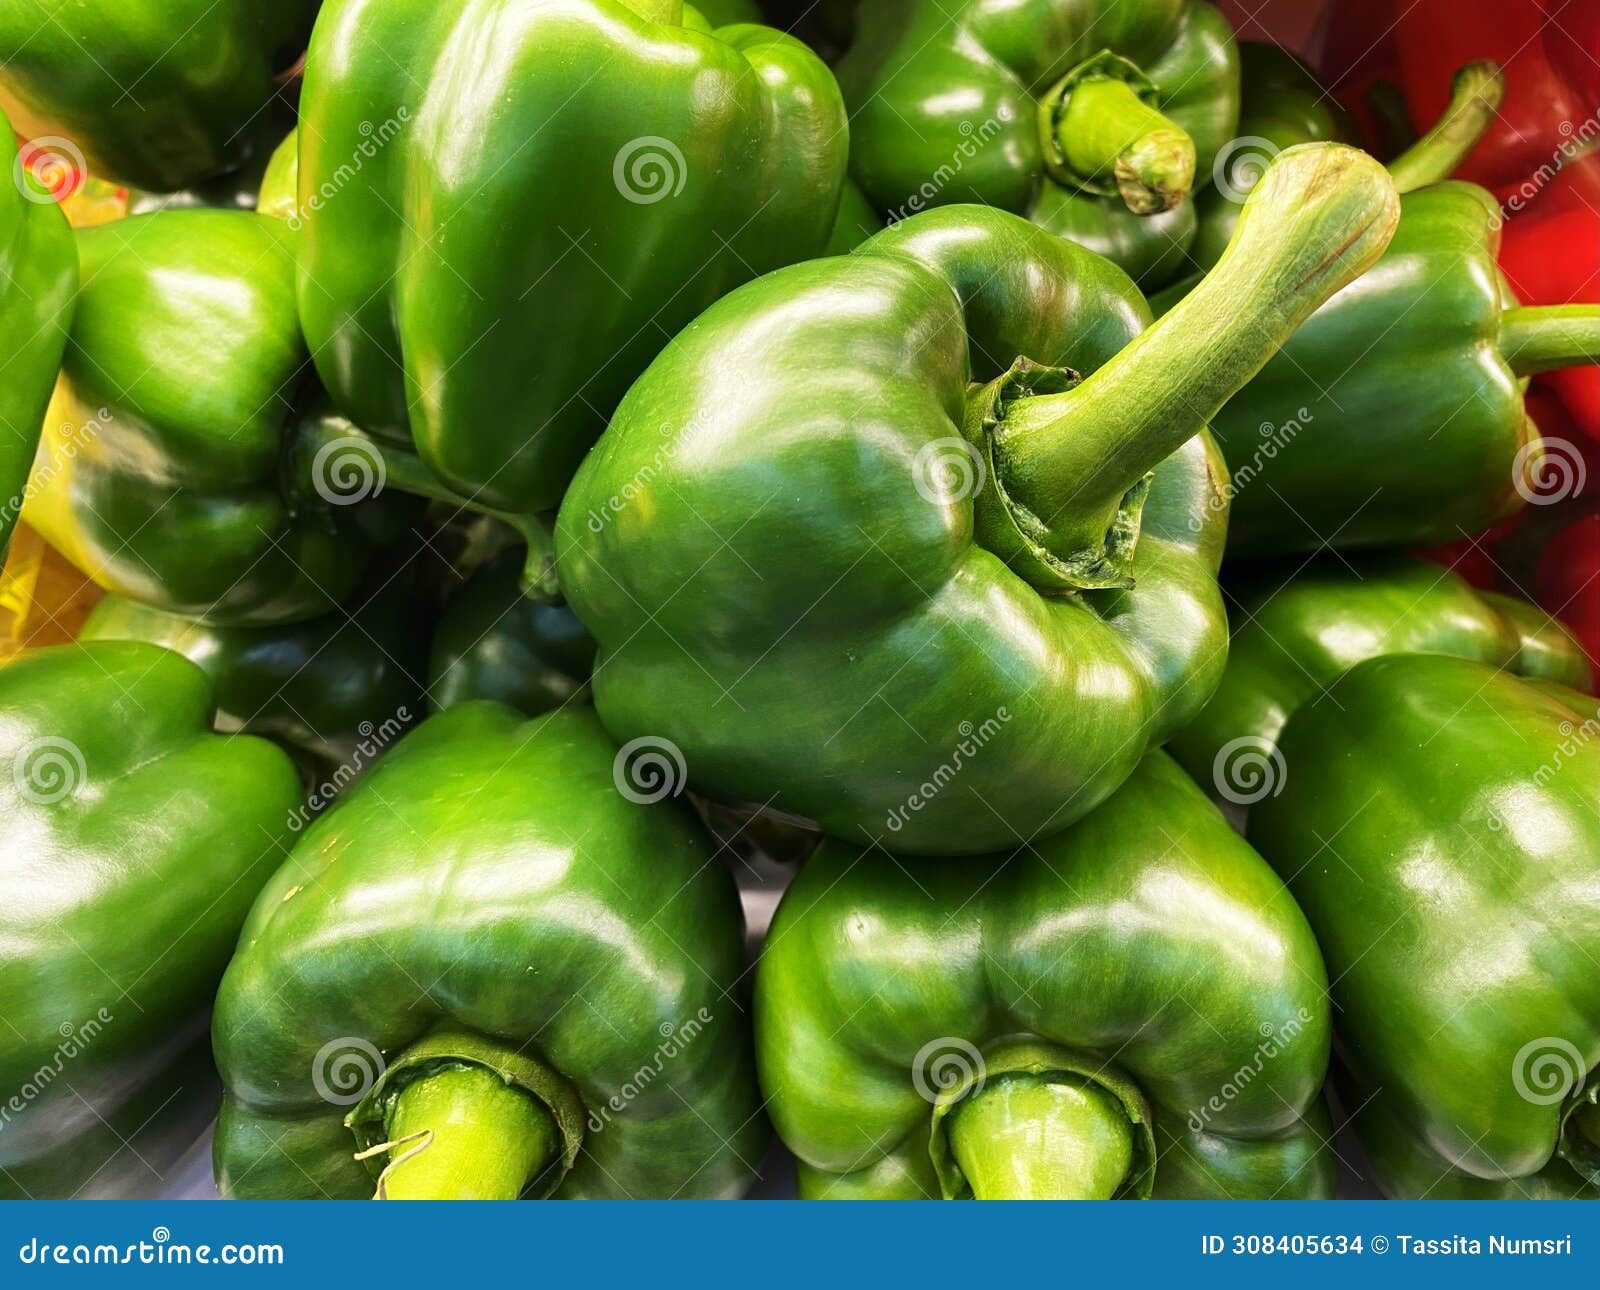 freshly picked green bell peppers on display at the market